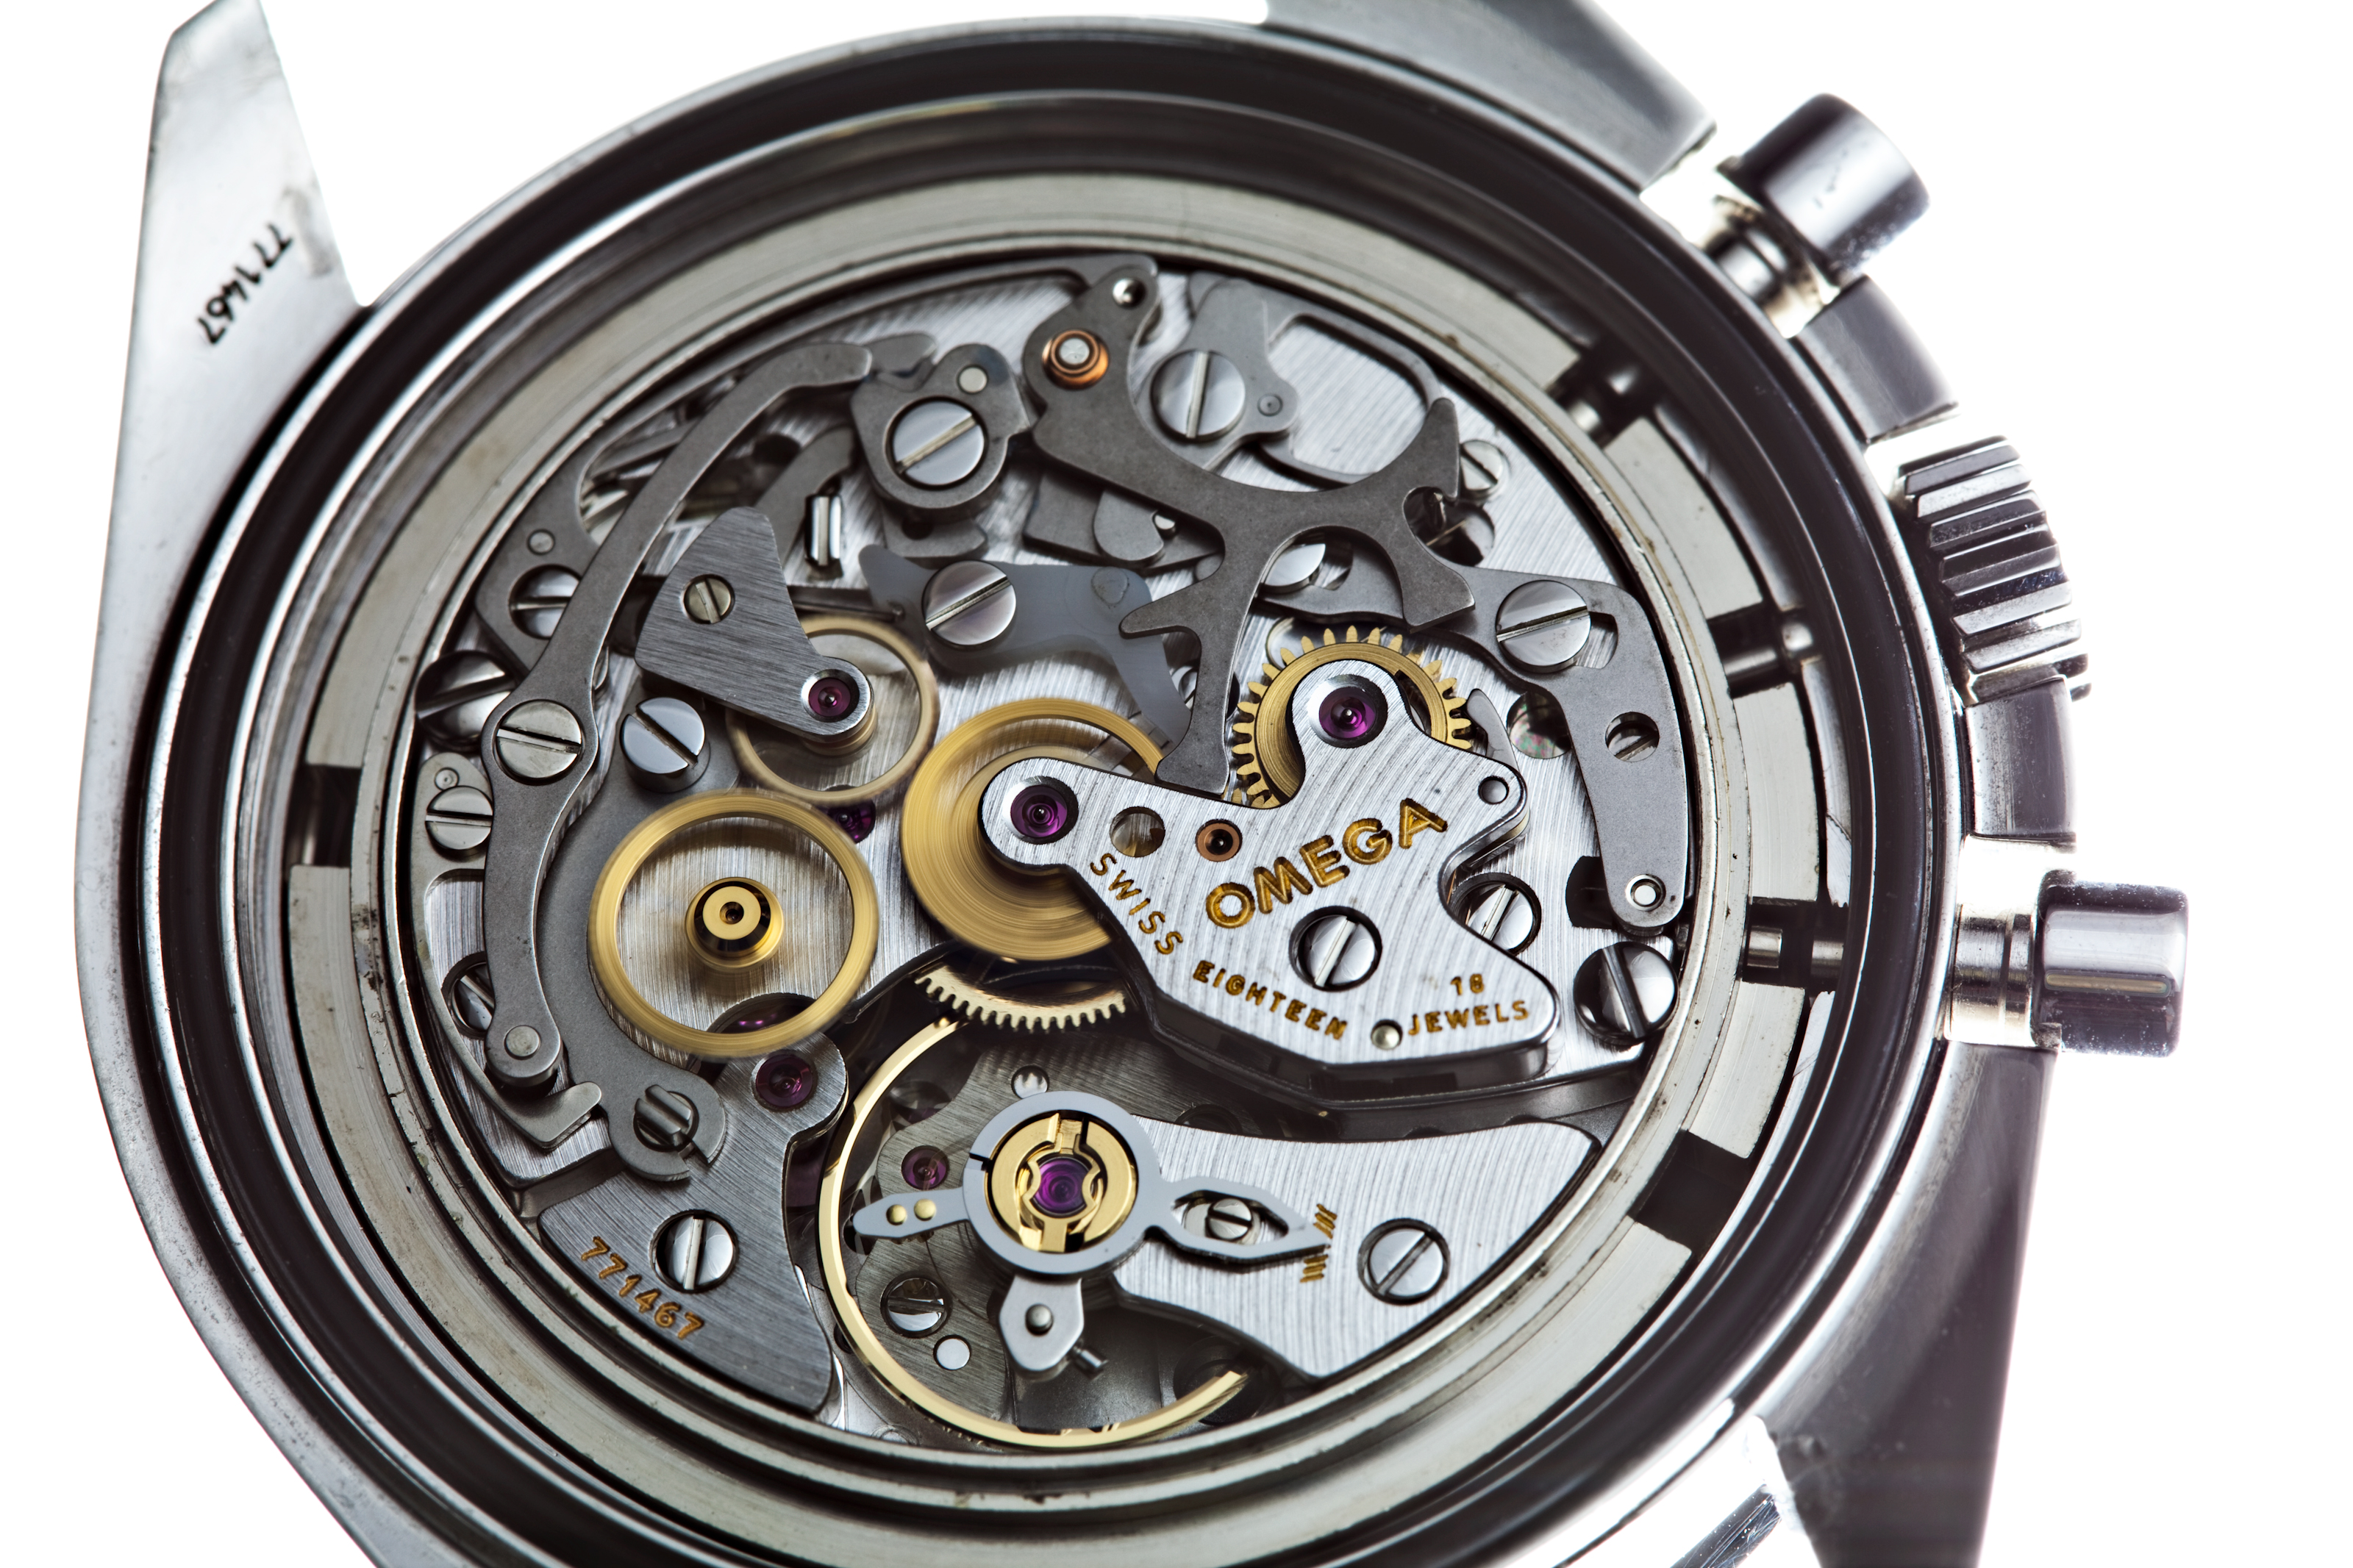 An OMEGA watch with its back open displaying the mechanisms